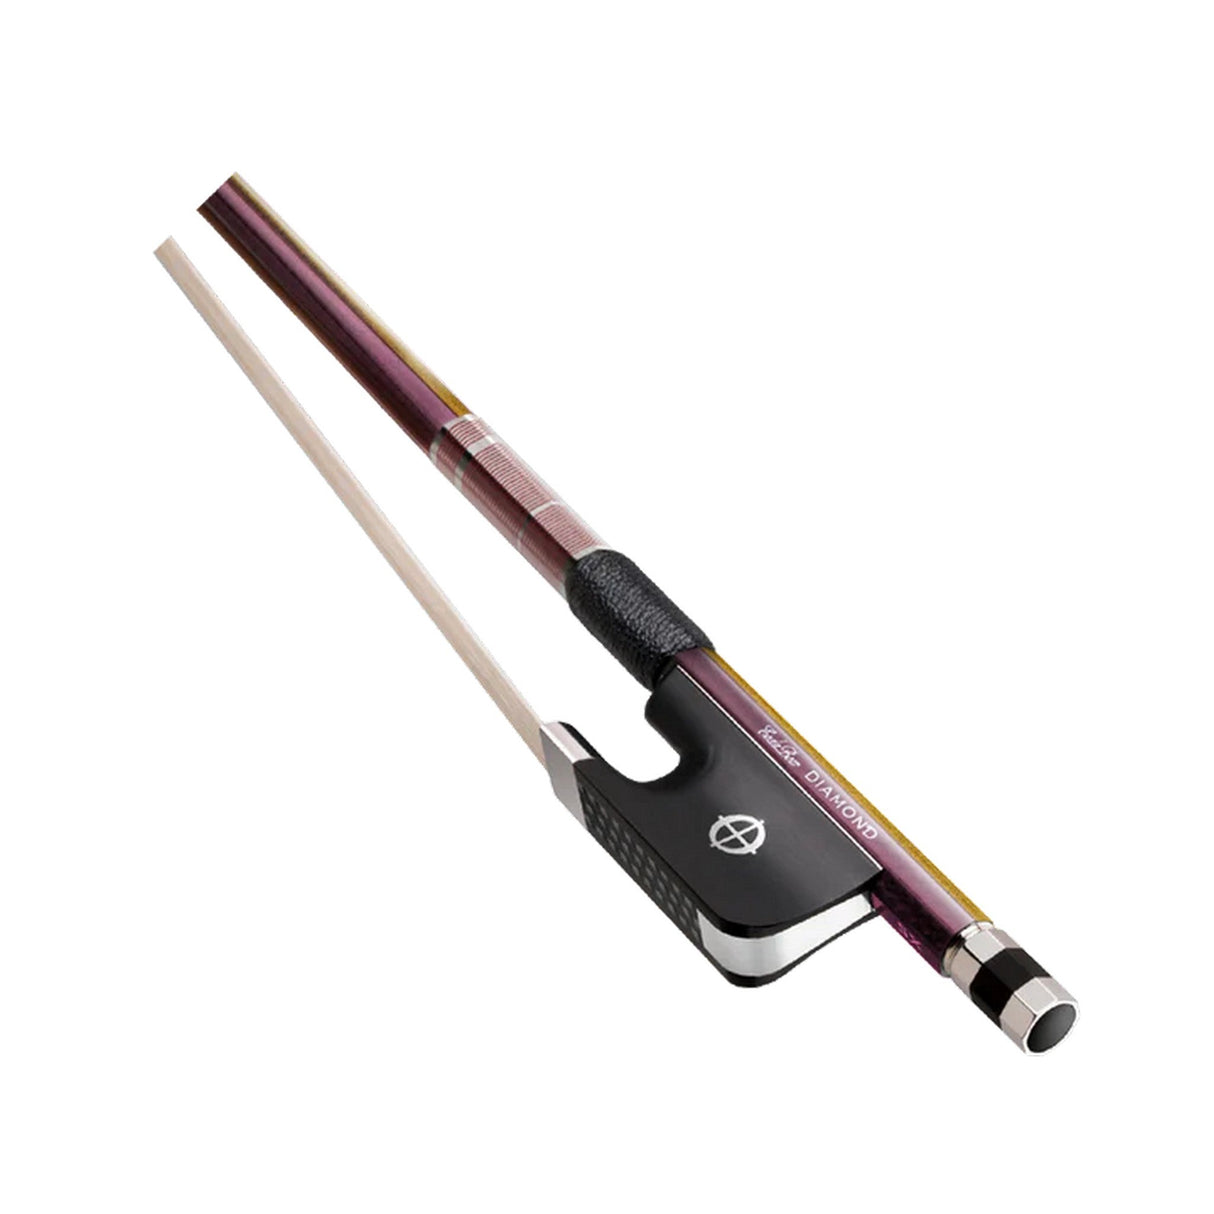 CodaBow DSC4ROR Chroma Diamond SX Cello Bow, Ruby Amber Prismatic with Ruby Winding